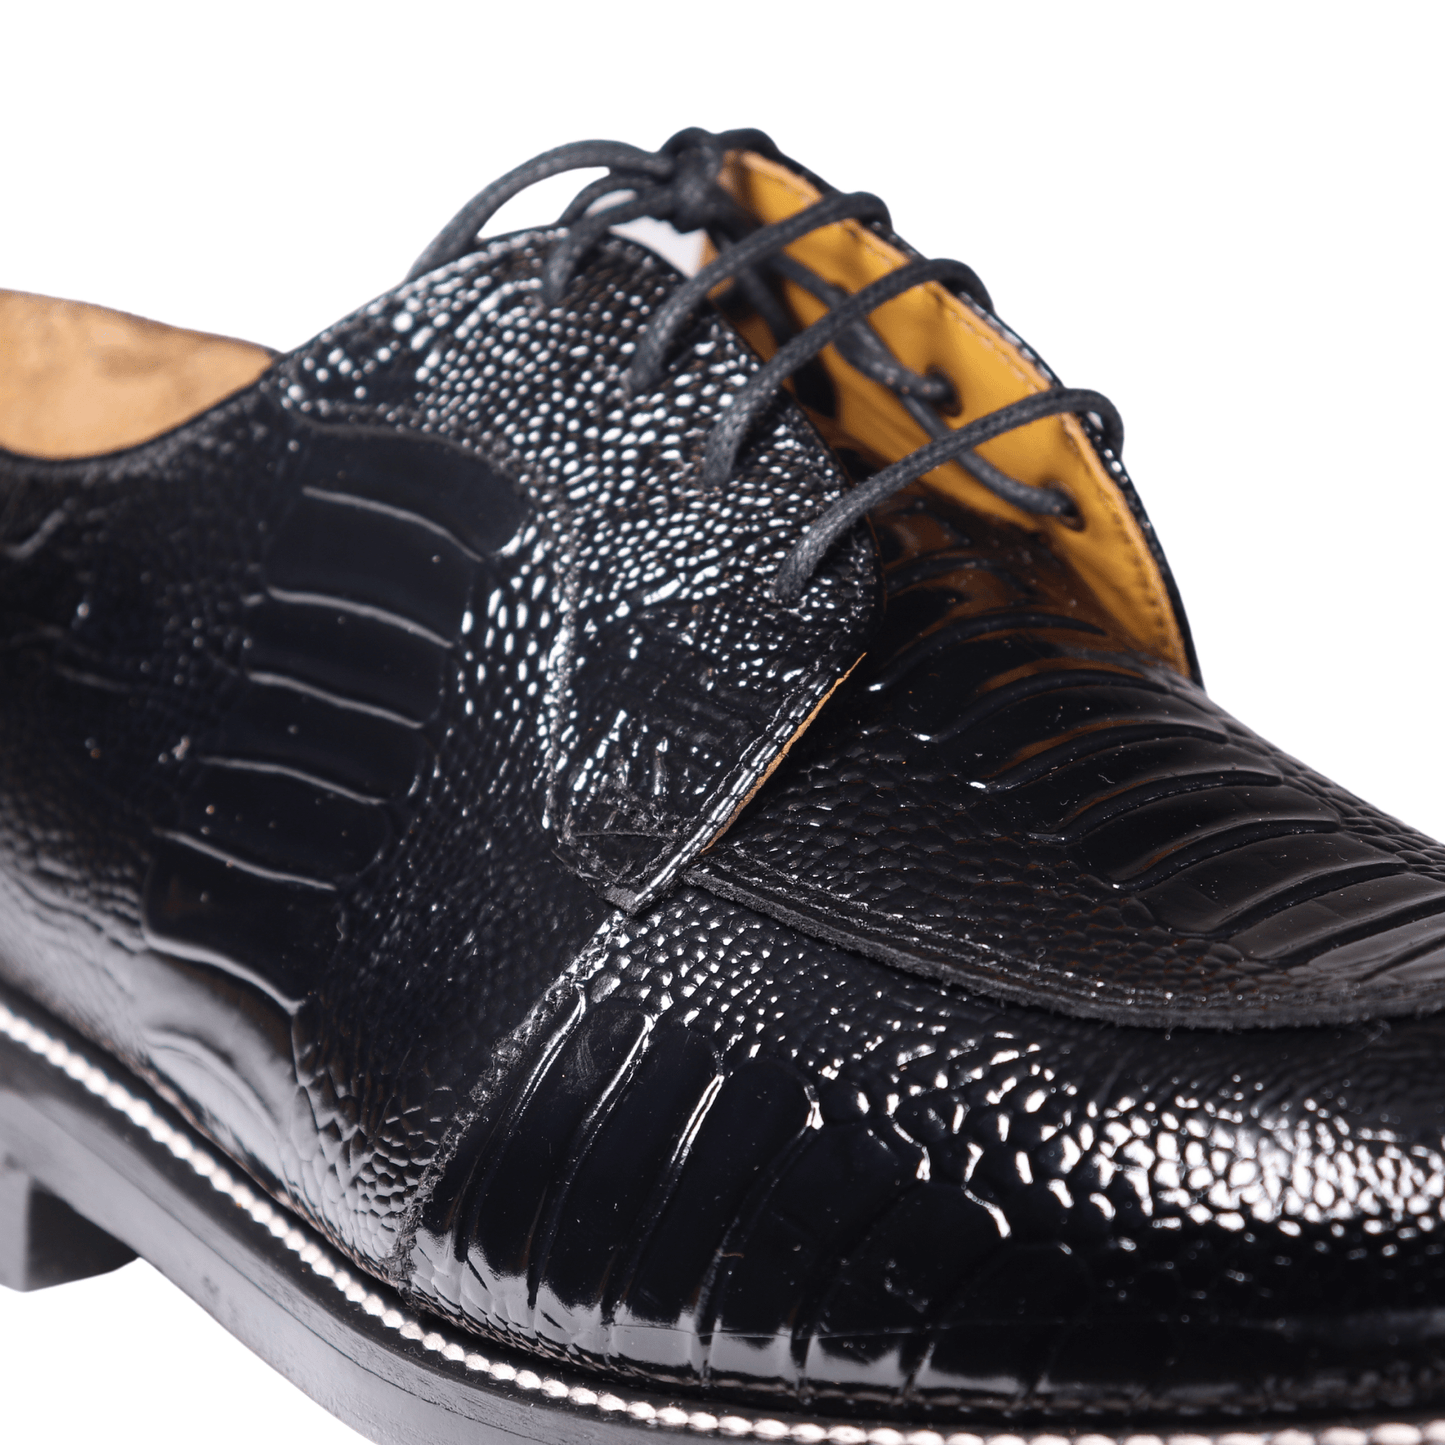 Johnston & Murphy Black Welted Lace-up